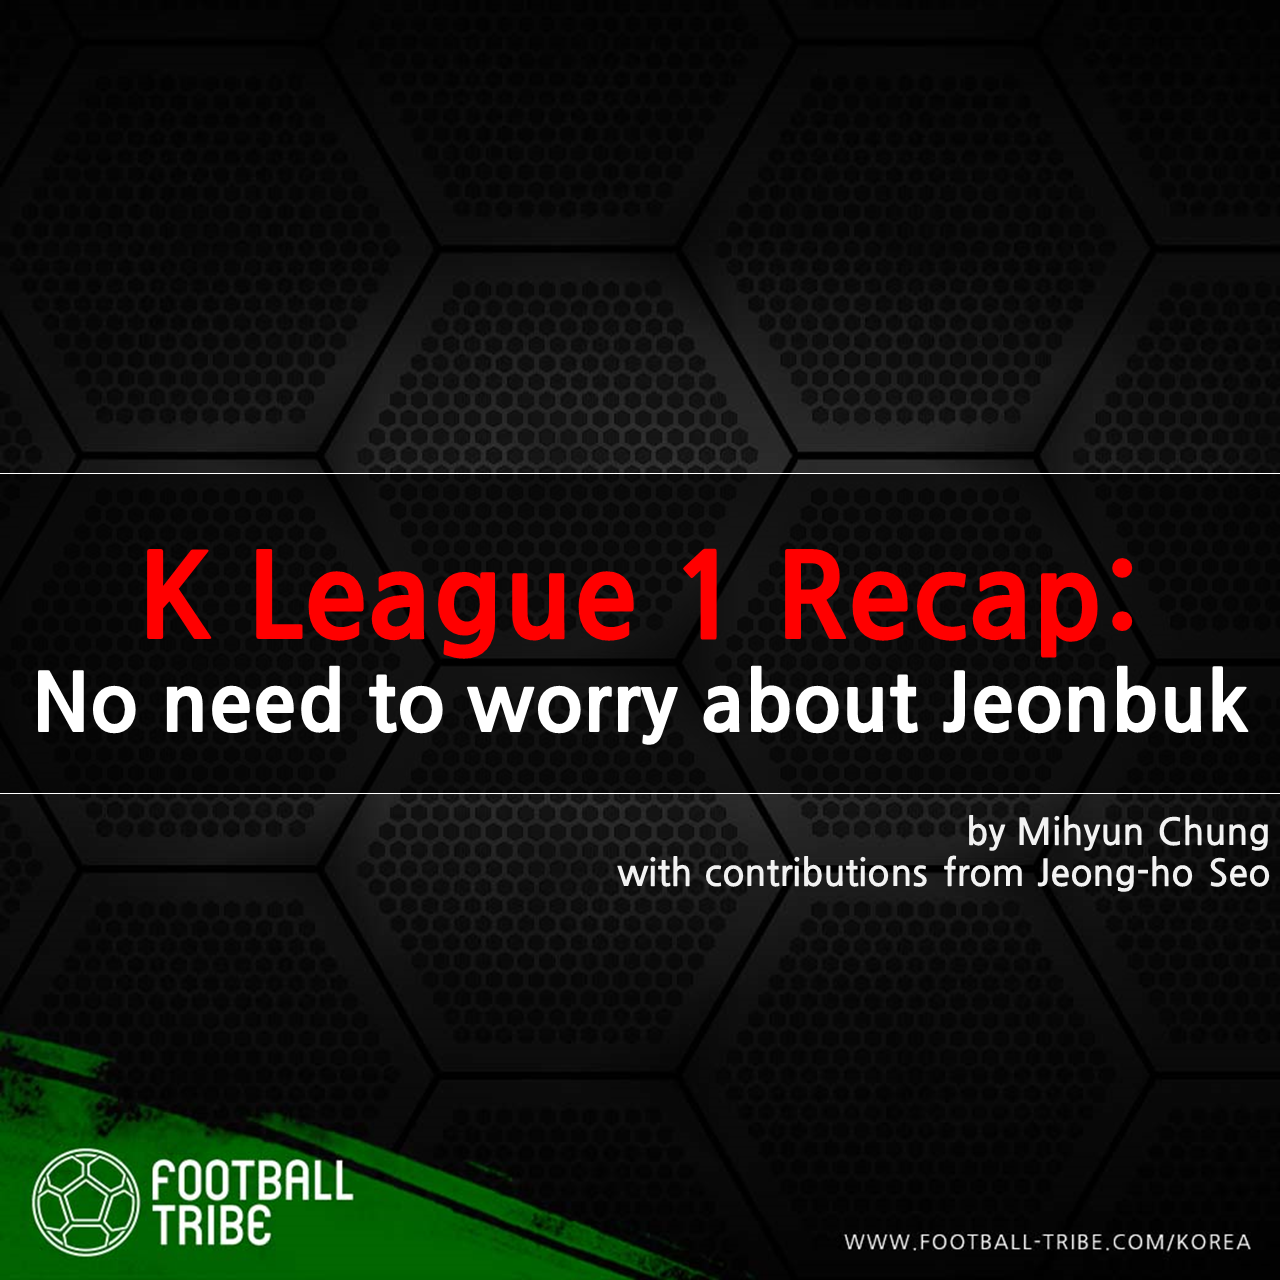 K League 1 Recap: 9th round proves that you don’t have to worry about Jeonbuk